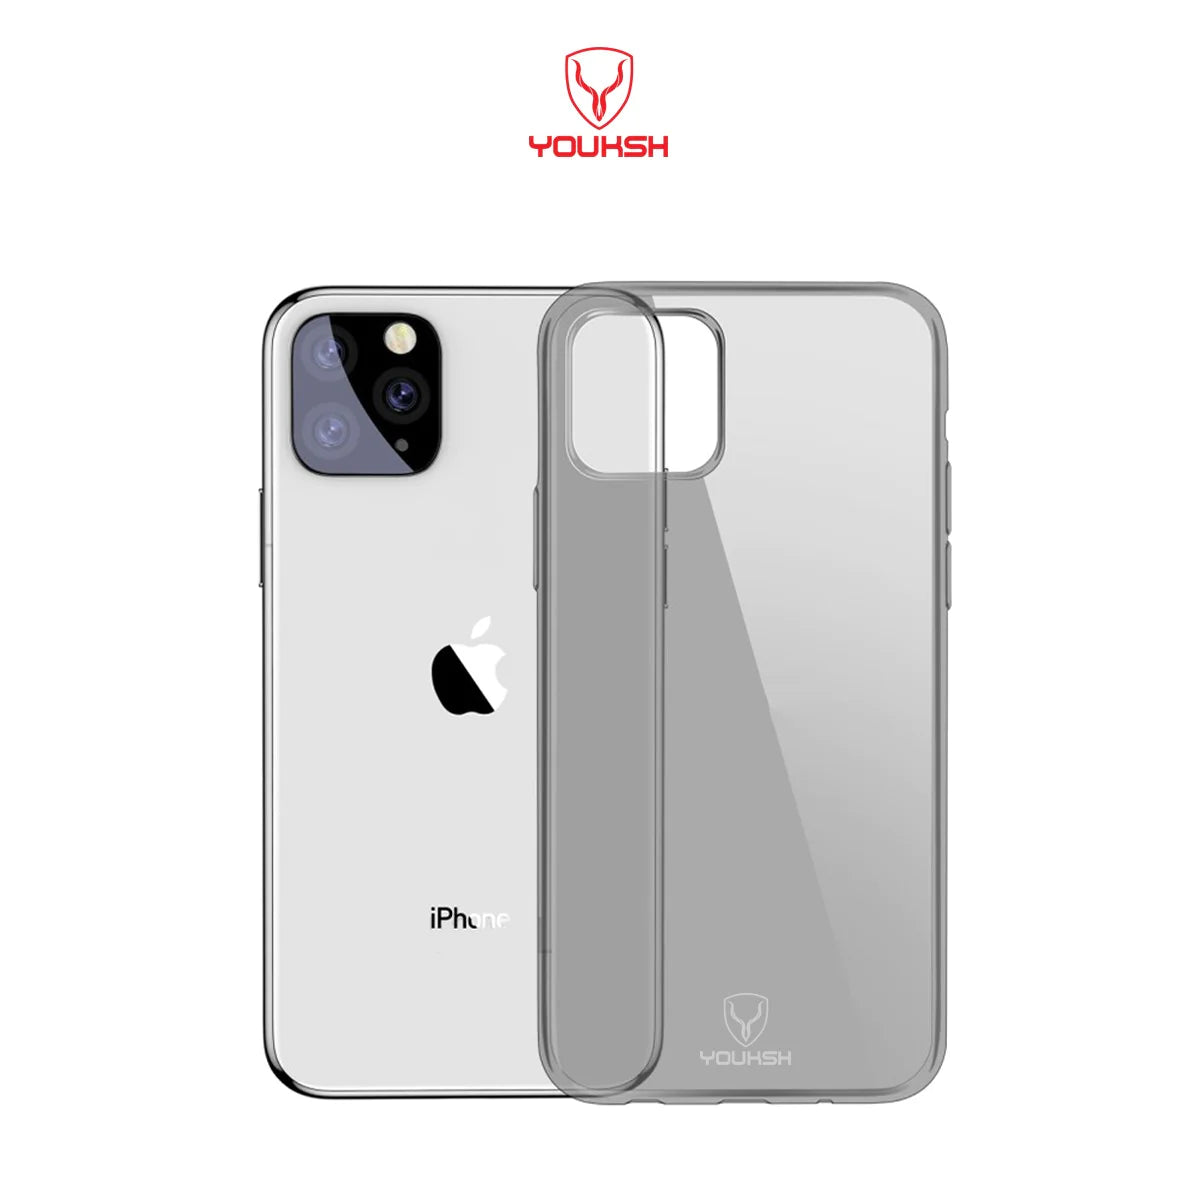 YOUKSH Apple iPhone 11 Pro Transparent Case | Soft Shock Proof Jelly Cover